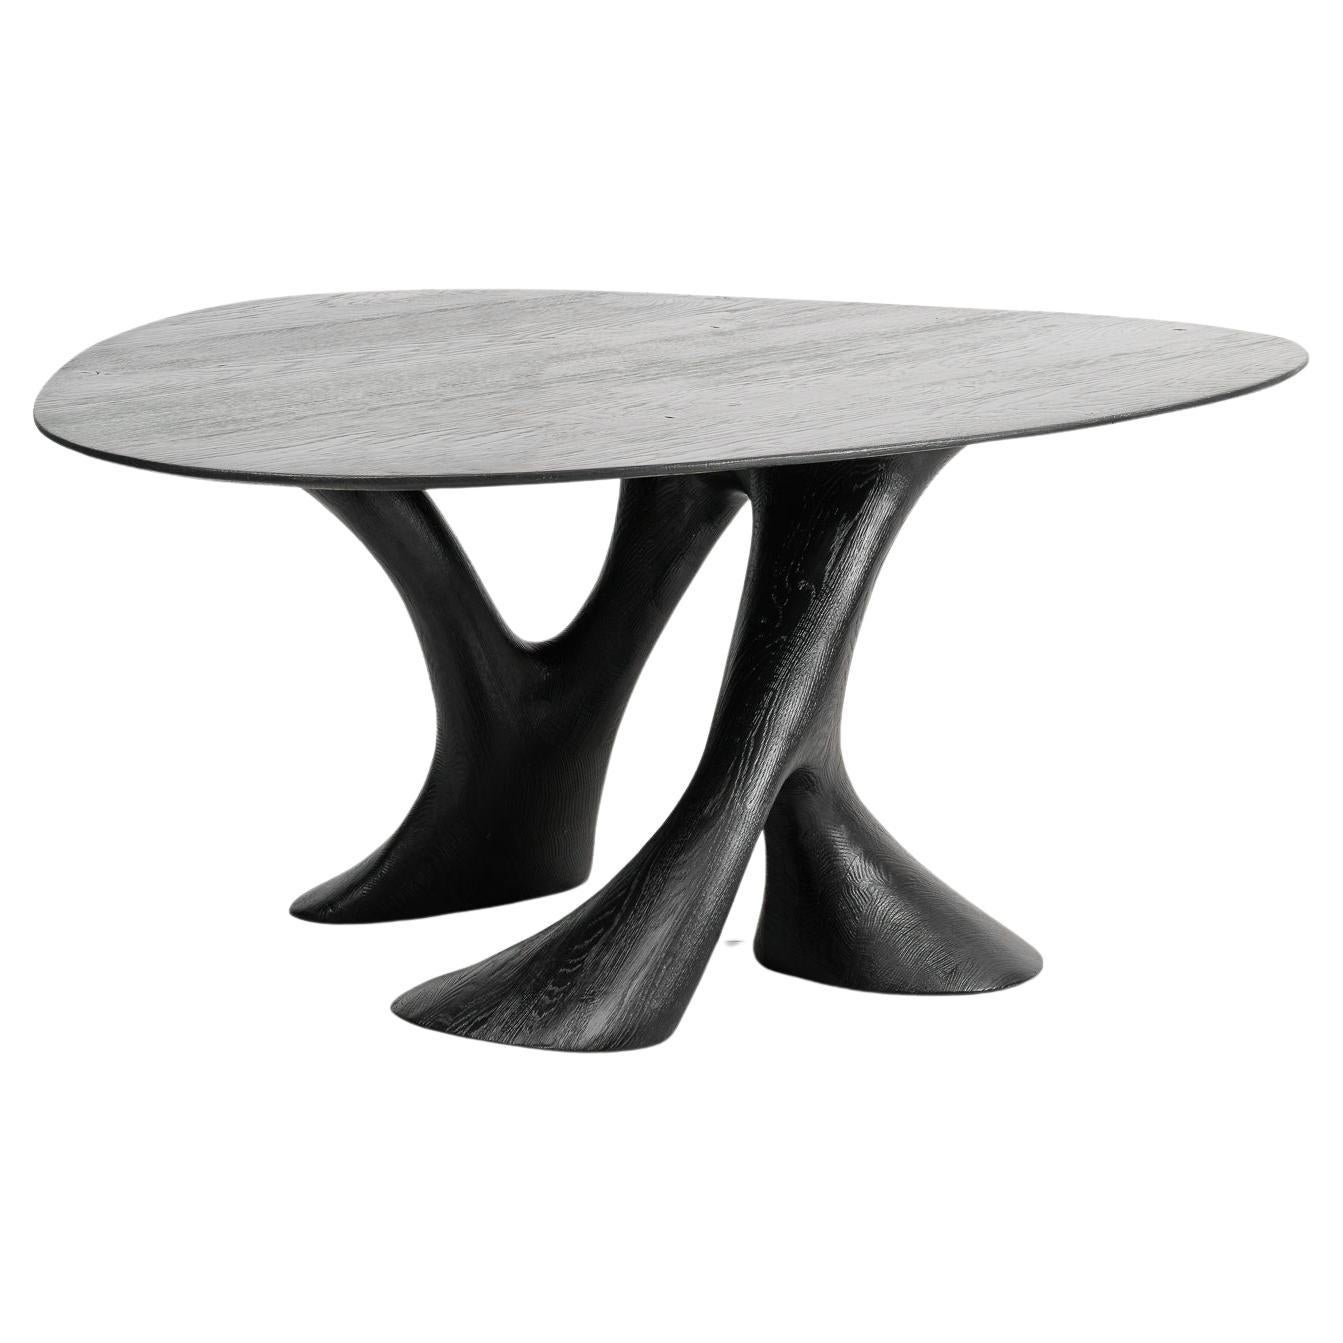 Ian Spencer, Pure Black Dining Table, 2023